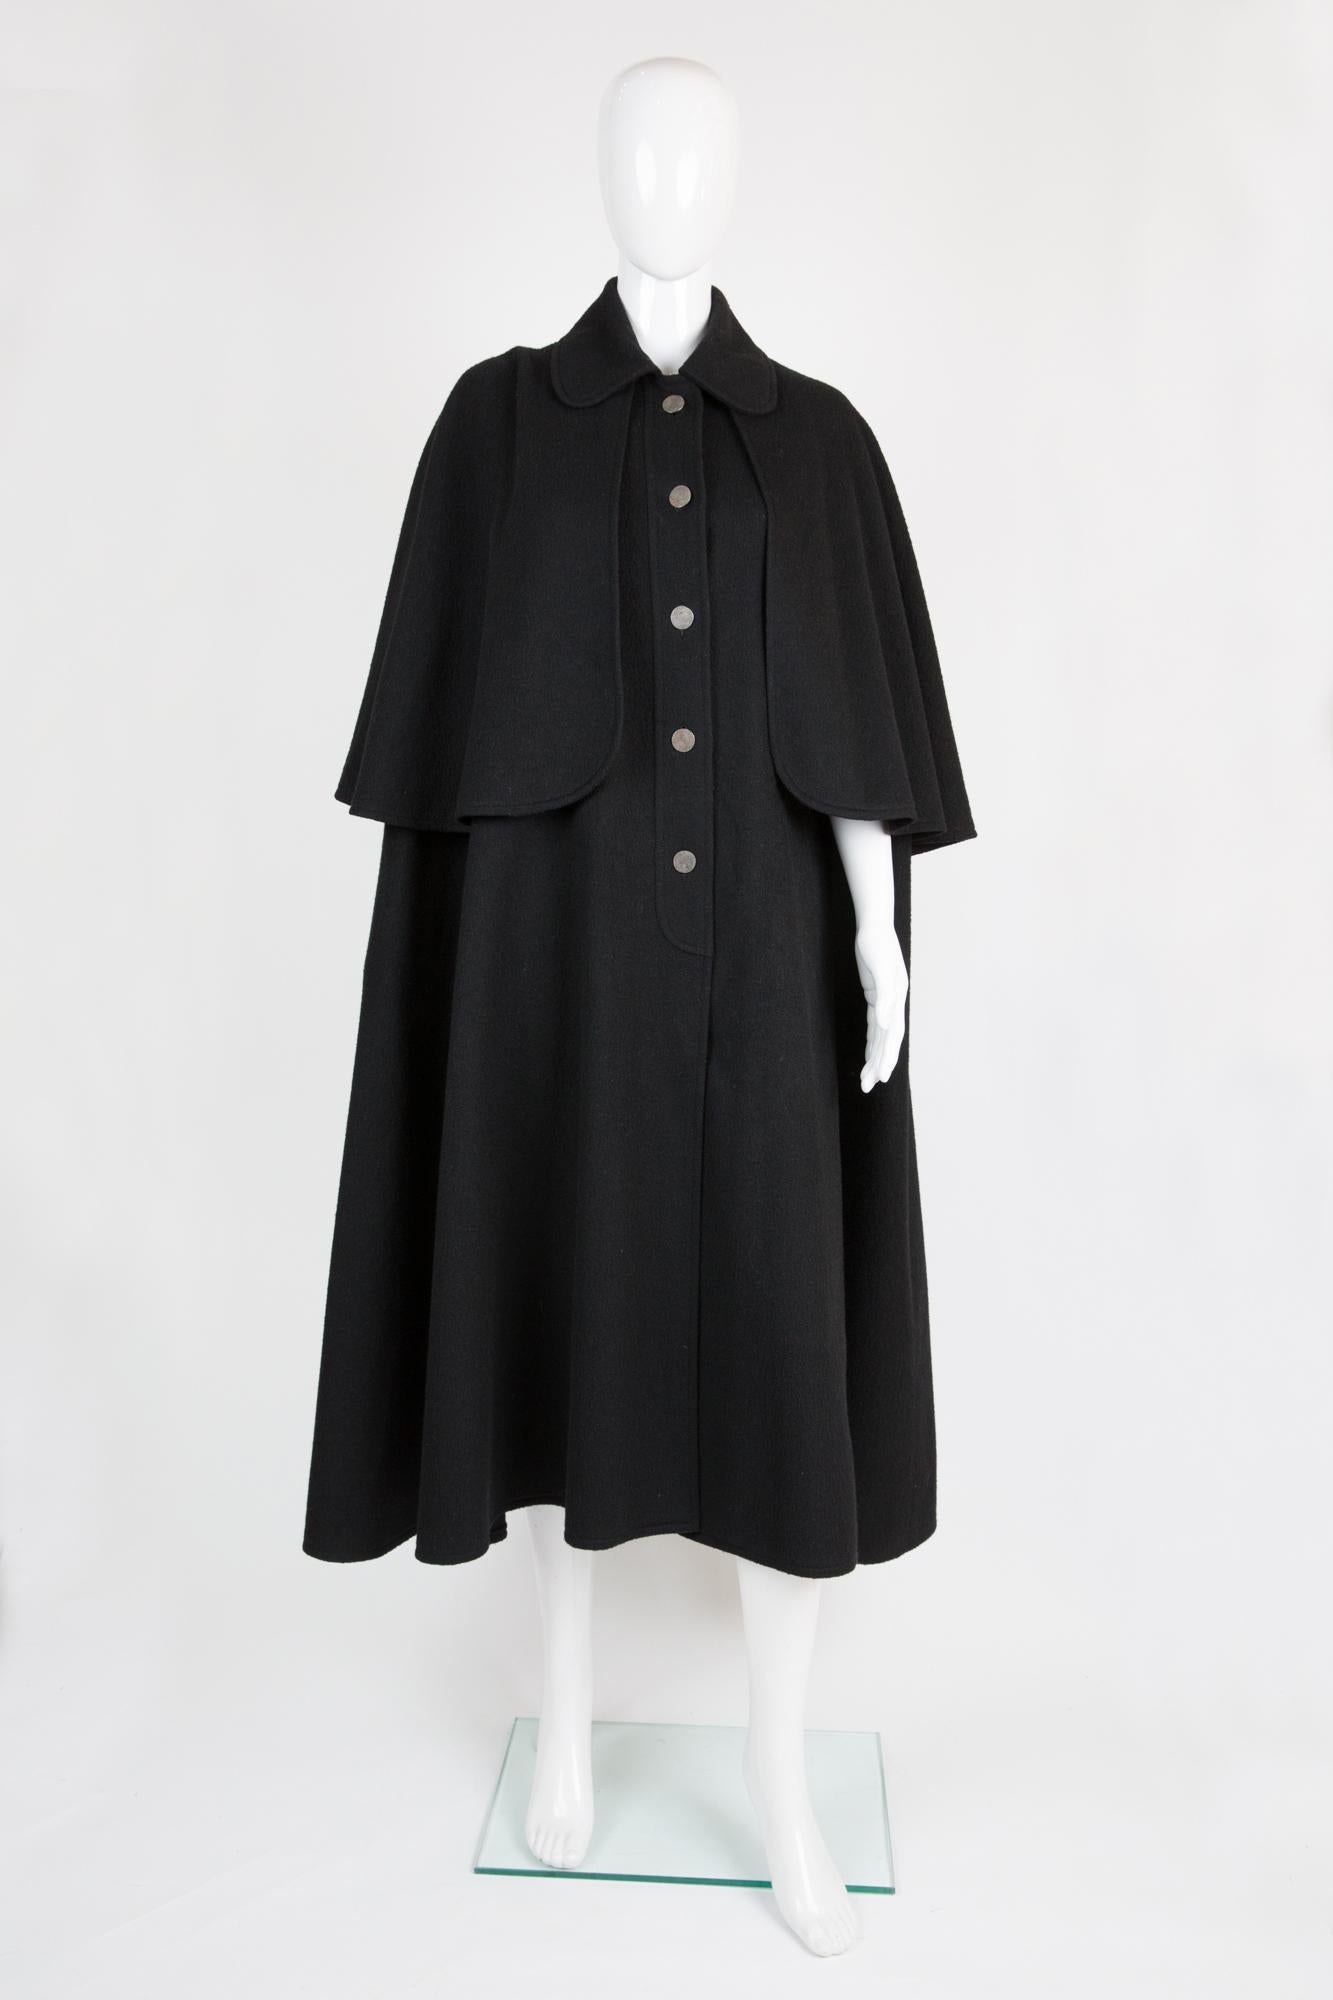 Iconic 1970s YSL Yves Saint Laurent black wool cape coat featuring a front silver tone button opening, inside slits to pass arms.
In good vintage condition. Made in France. 
Label size 38fr/US6 /UK10
We guarantee you will receive this gorgeous item